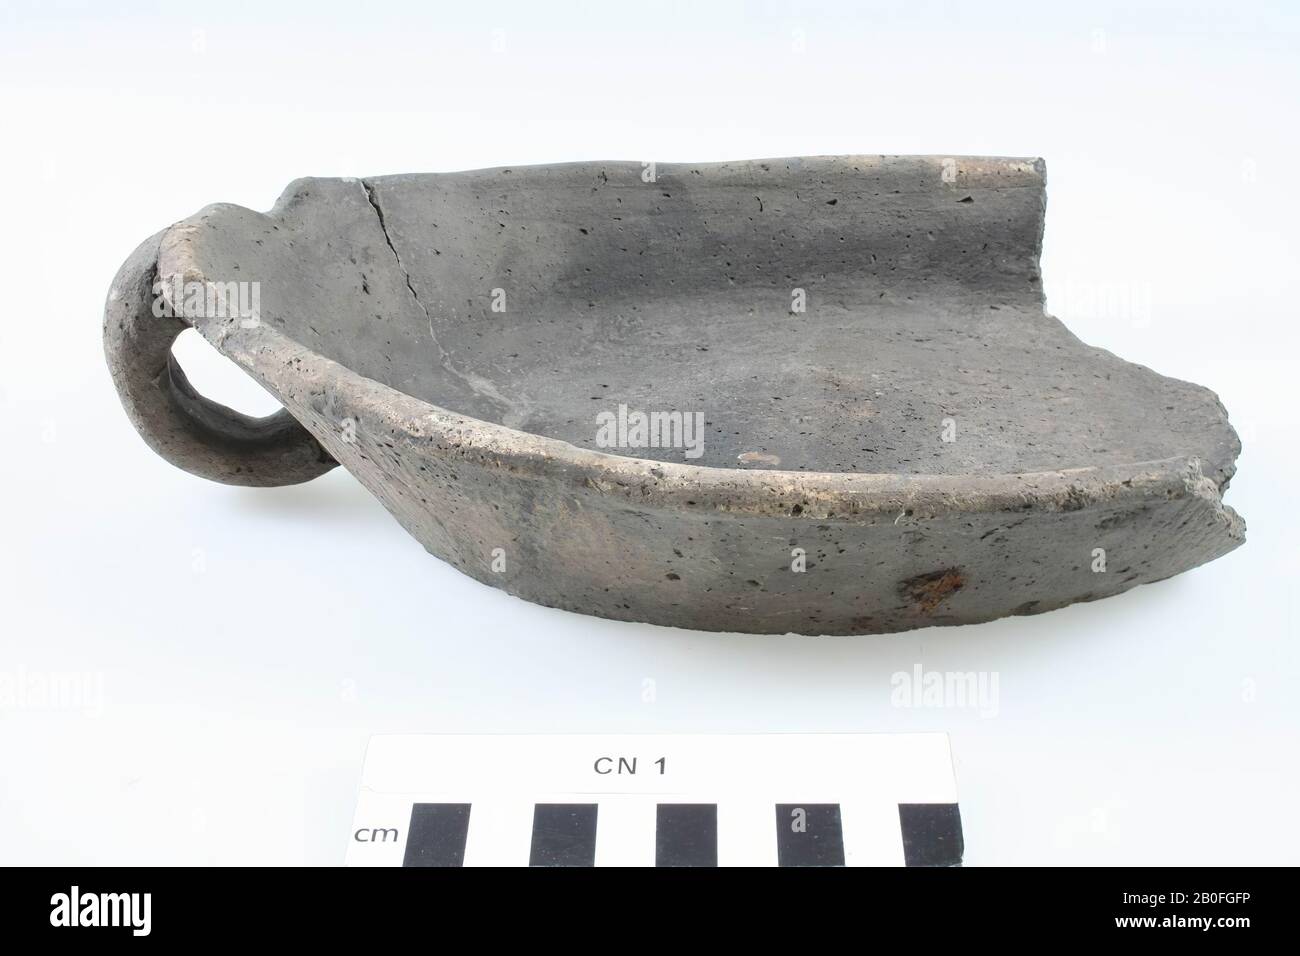 Oval dish (earthenware) of dark gray color, at one end still with an earpiece, the other end is broken. Rare form. Compare with urn C II 102. Old bonding, grease trap, earthenware (smooth wall), 6.5 x 24.8 x 16.9 cm, lme 1400-1600 AD, Netherlands, North Brabant, Cuijk, Cuijk Stock Photo